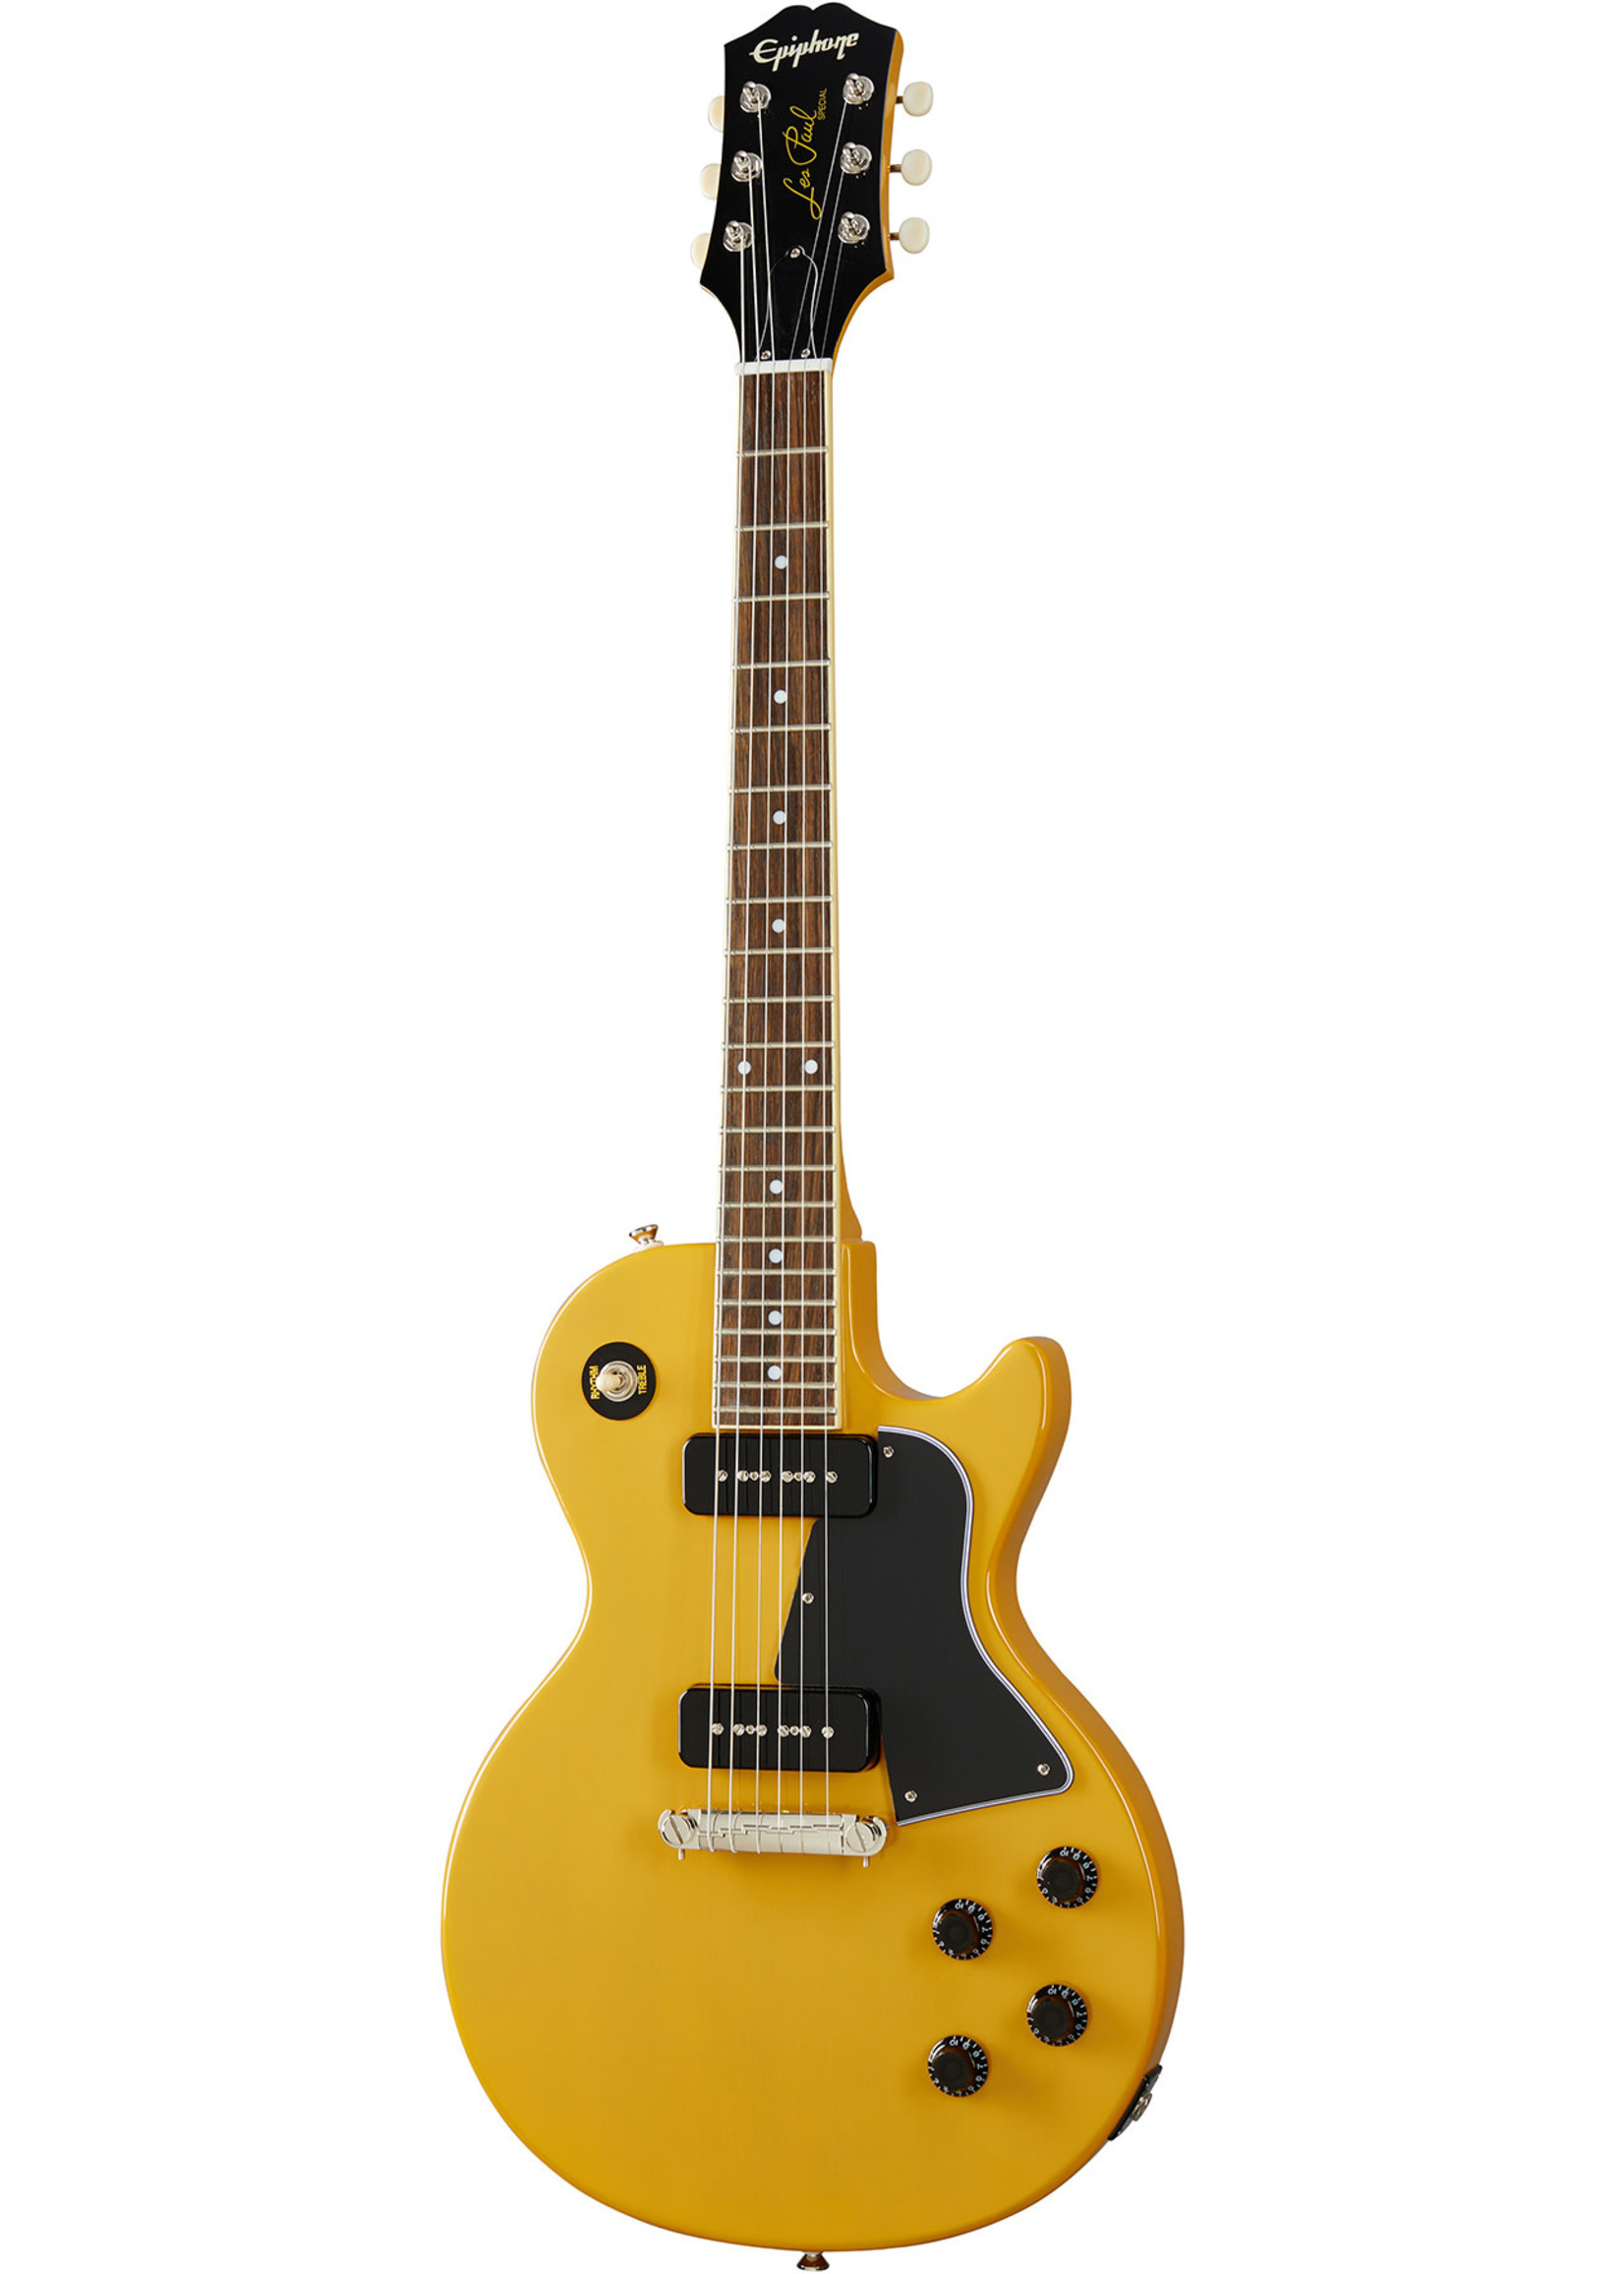 Epiphone Epiphone EILPTVNH Les Paul Special 6-String RH Electric Guitar-TV Yellow eilp-tv-nh